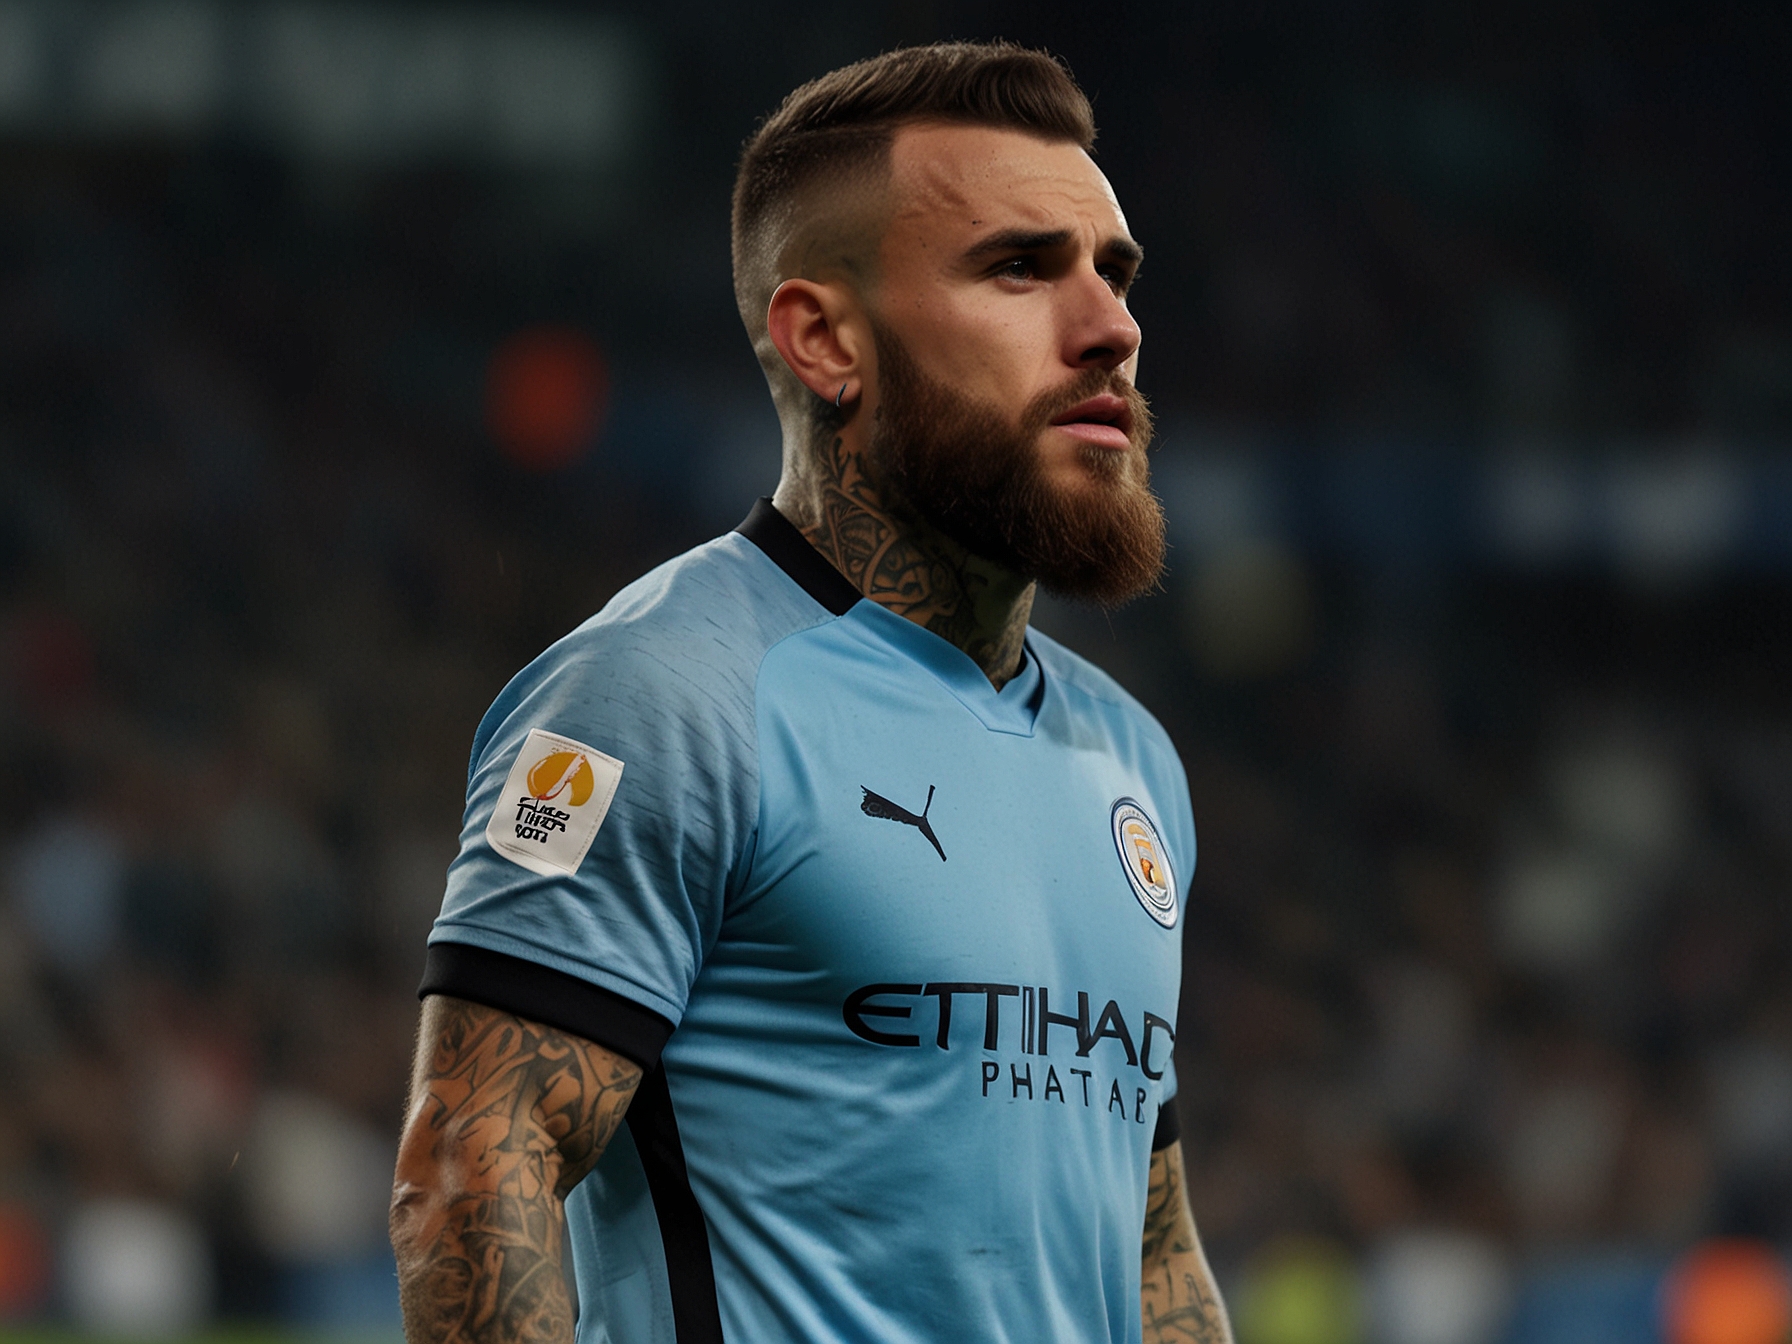 Nicolás Otamendi expressing strong dissatisfaction during a post-match interview, highlighting the player safety risks and calling the temporary pitch a 'disaster' after the match.